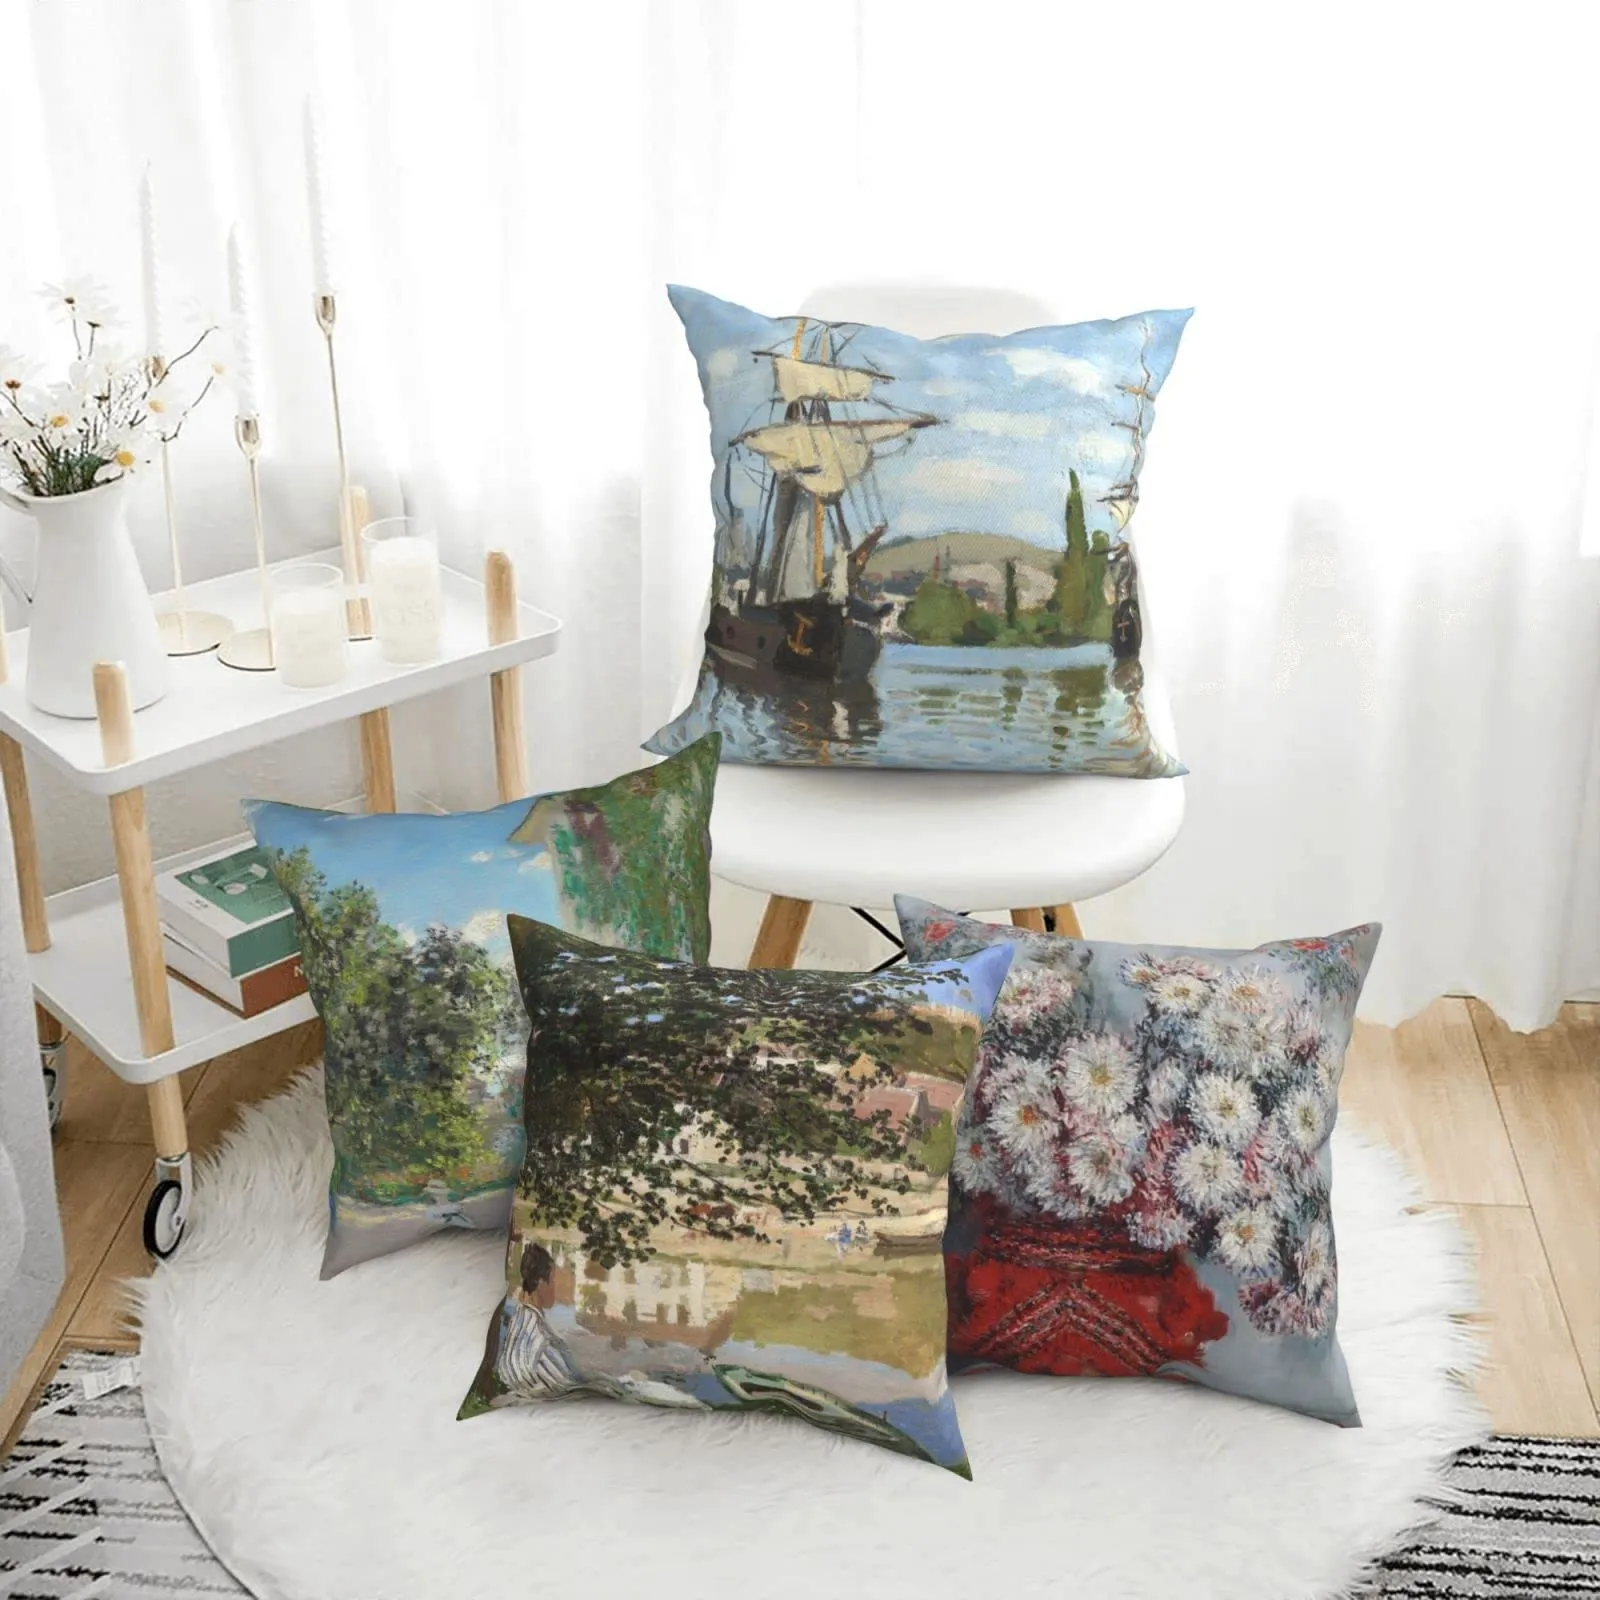 monet throw pillow covers set of 4 decorative painting pillow cases farmhouse cushion covers 18x18 inch45x45 cm 